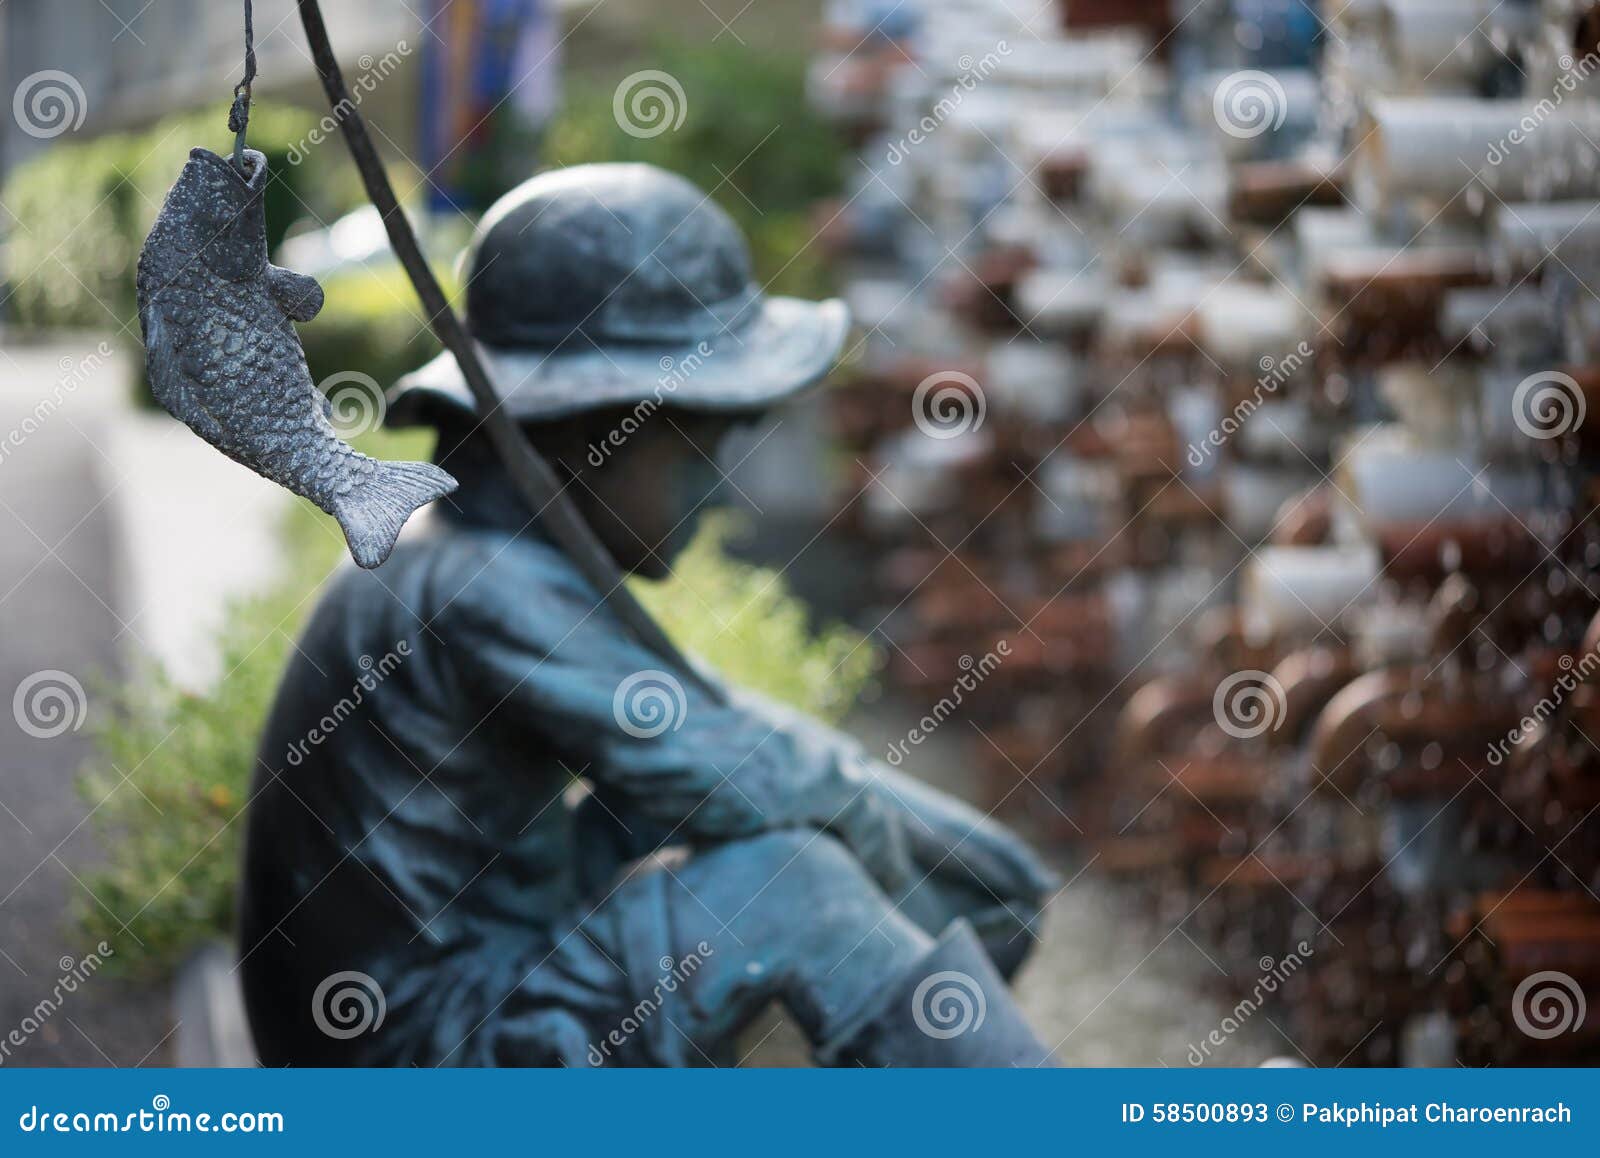 Sculpture of Little Boy Fishing in the Garden. Editorial Stock